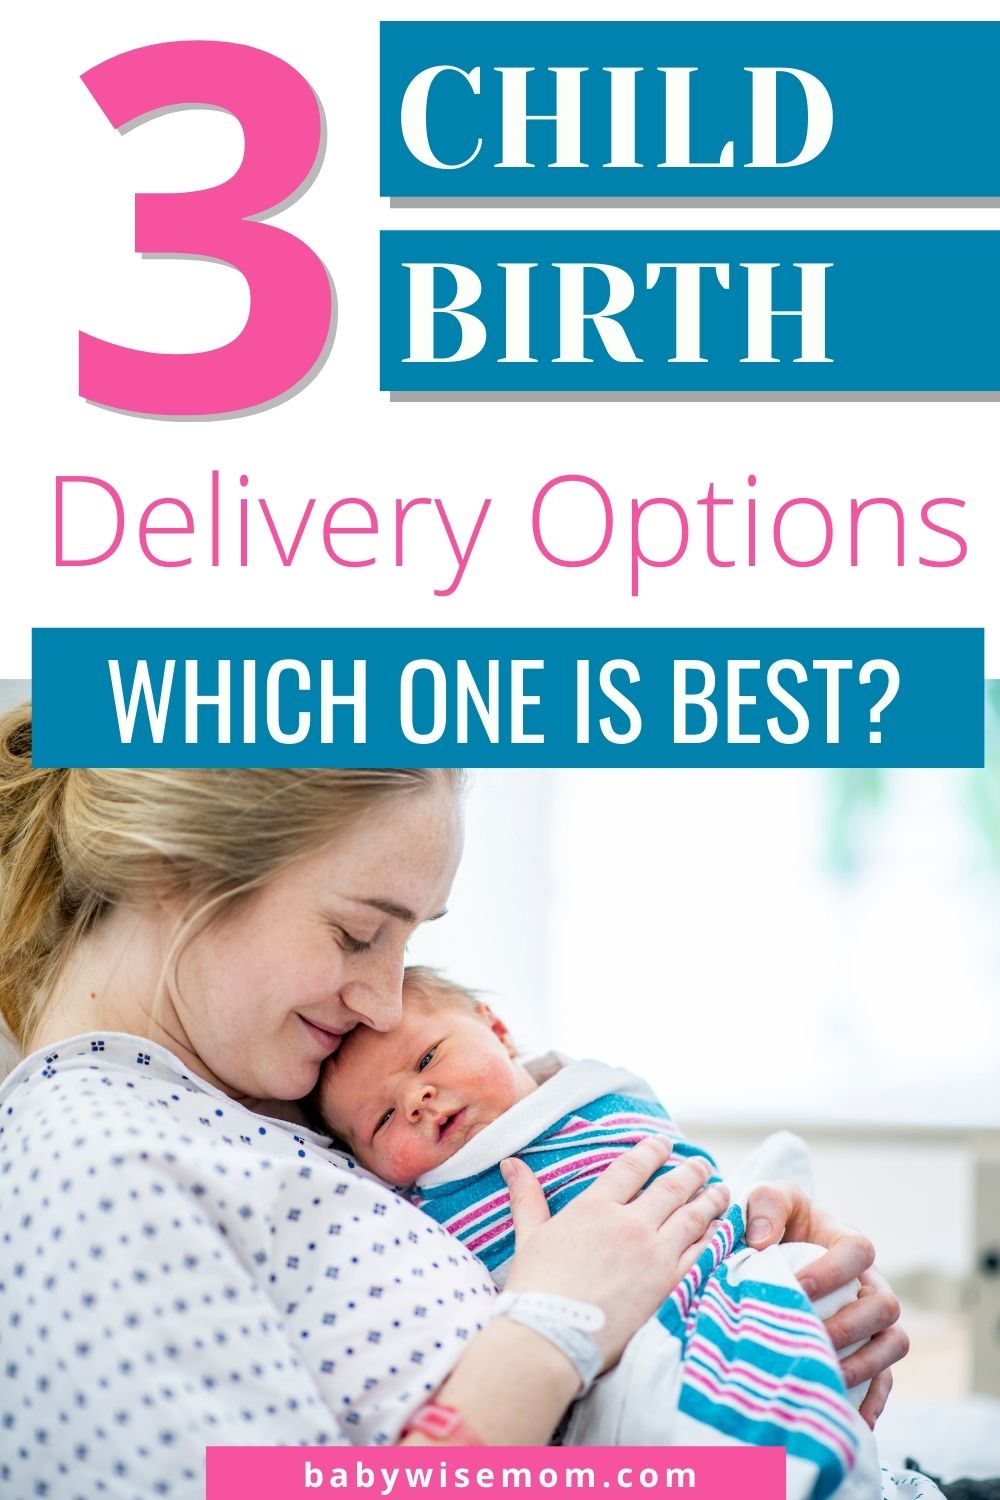 3 child birth delivery options pinnable image